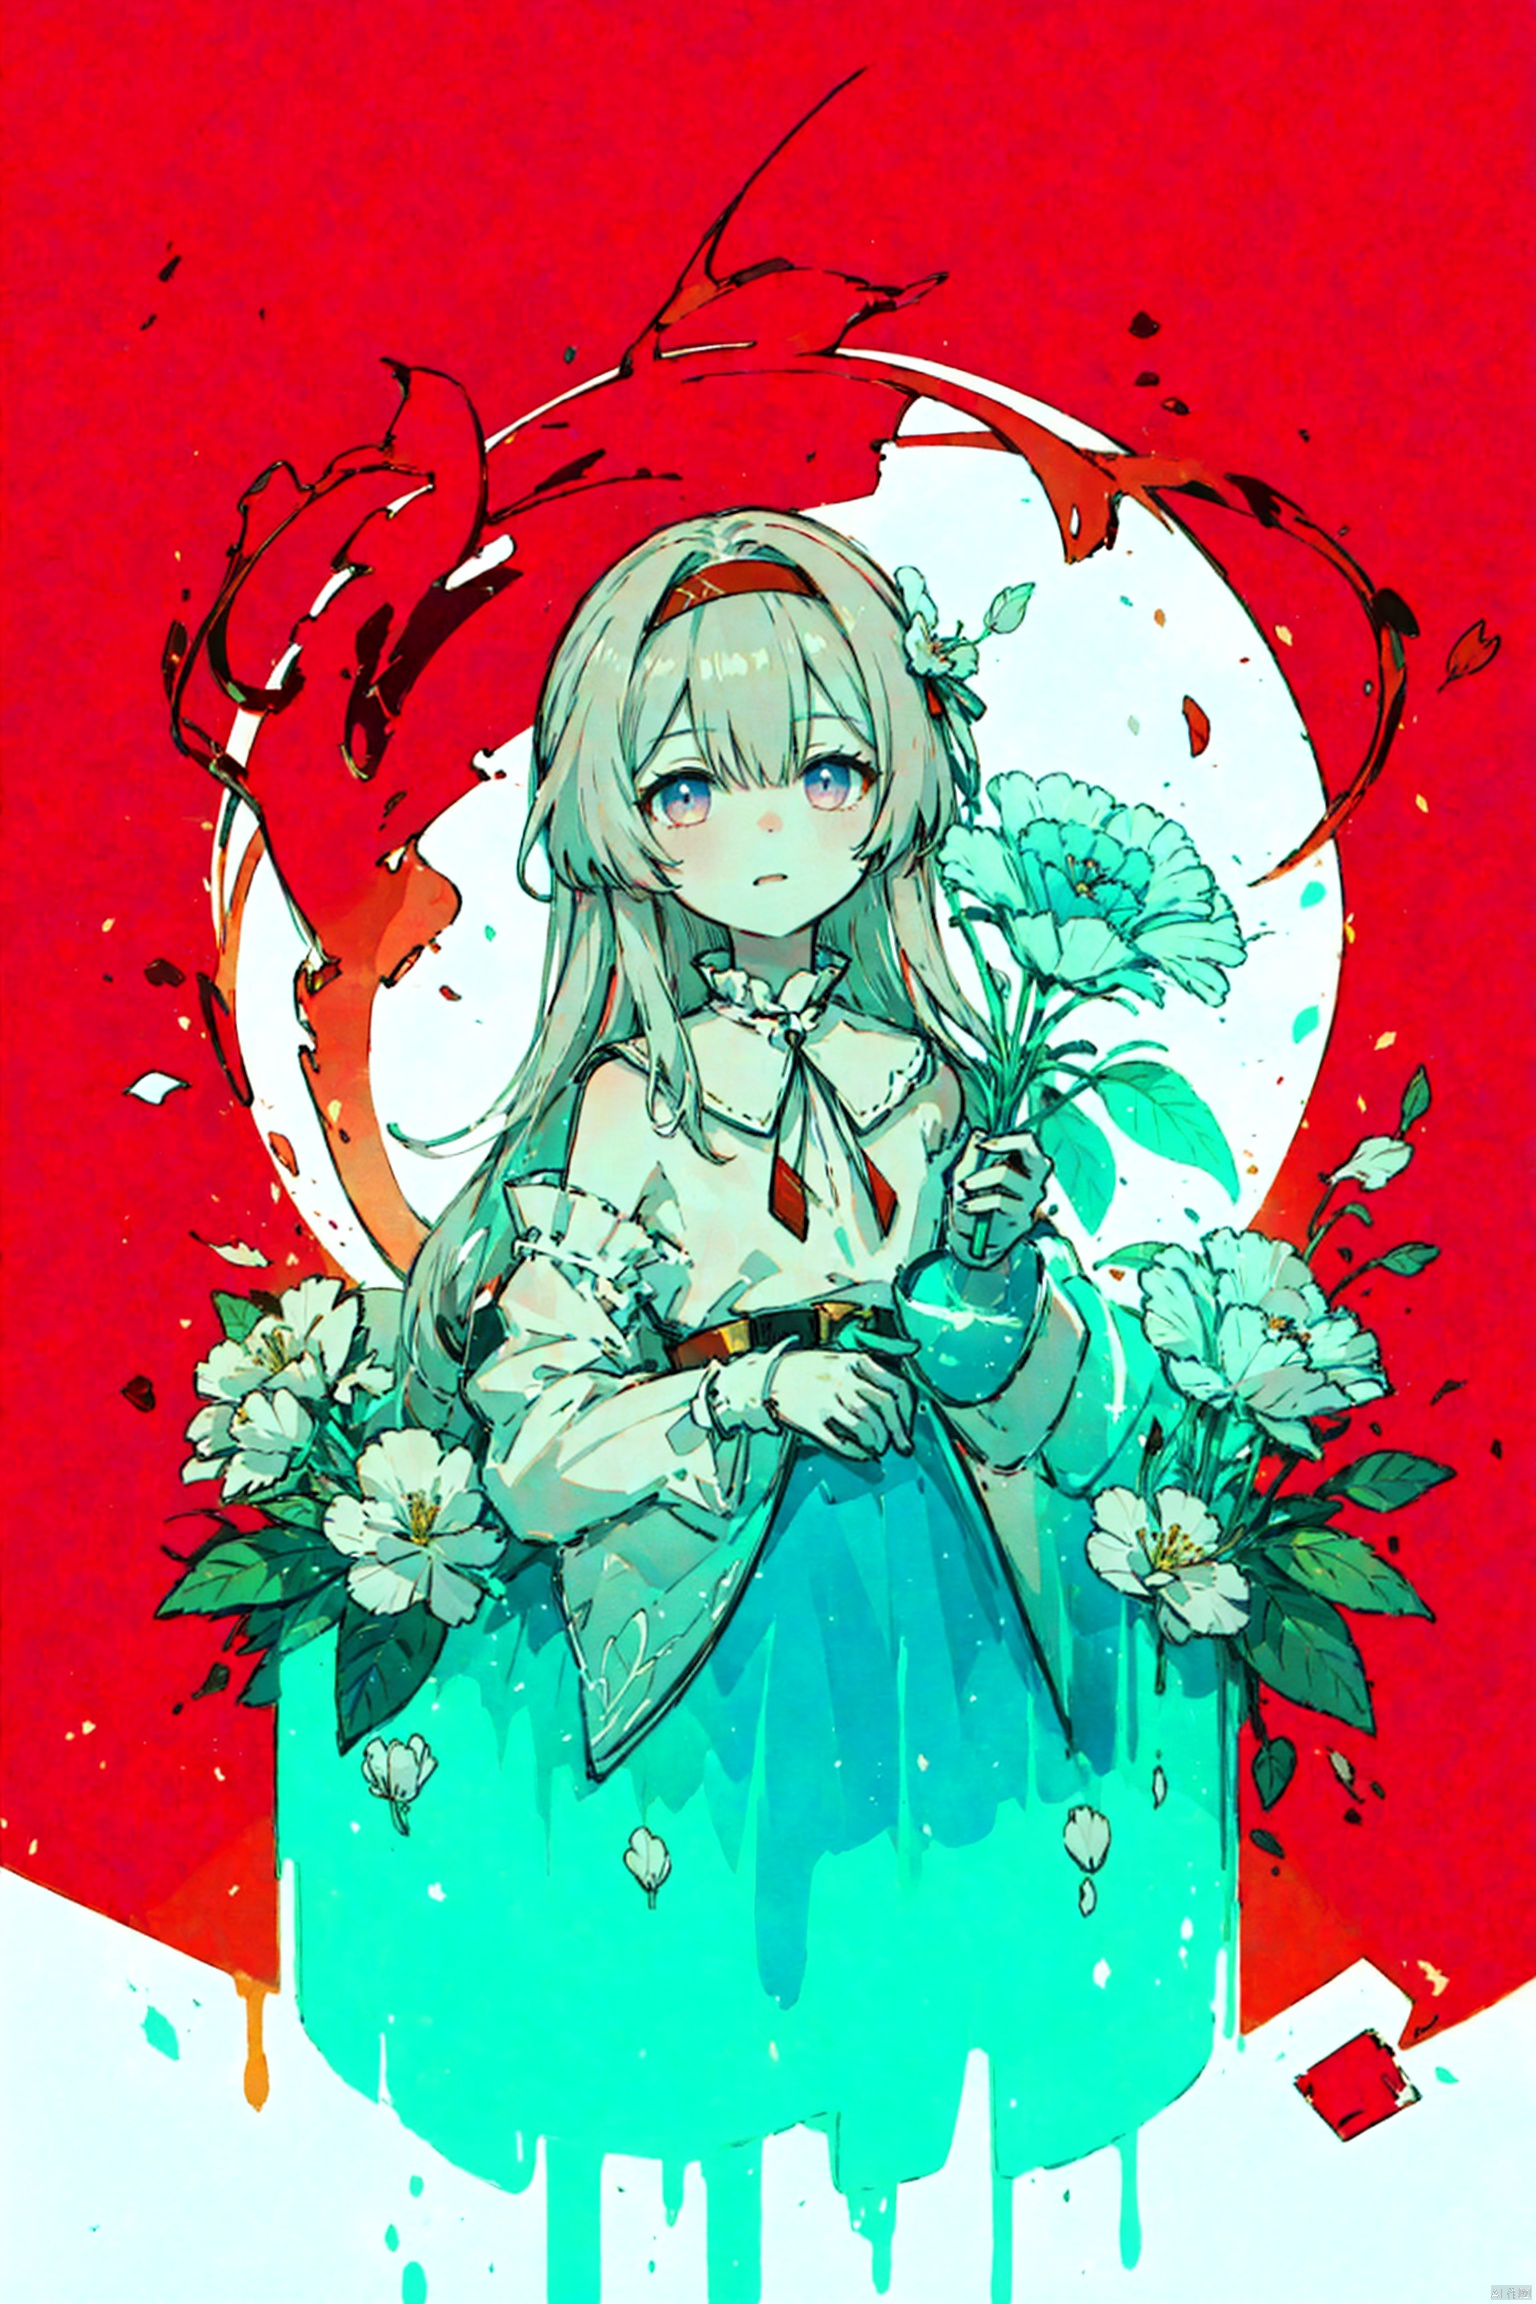  1girl, long hair, flower, Lisianthus, in the style of red and light azure, dreamy and romantic compositions, red, ethereal foliage, playful arrangements, fantasy, high contrast, ink strokes, explosions, over exposure, purple and red tone impression, abstract, whole body capture, ,
, 1girl, liuying, shota,red background